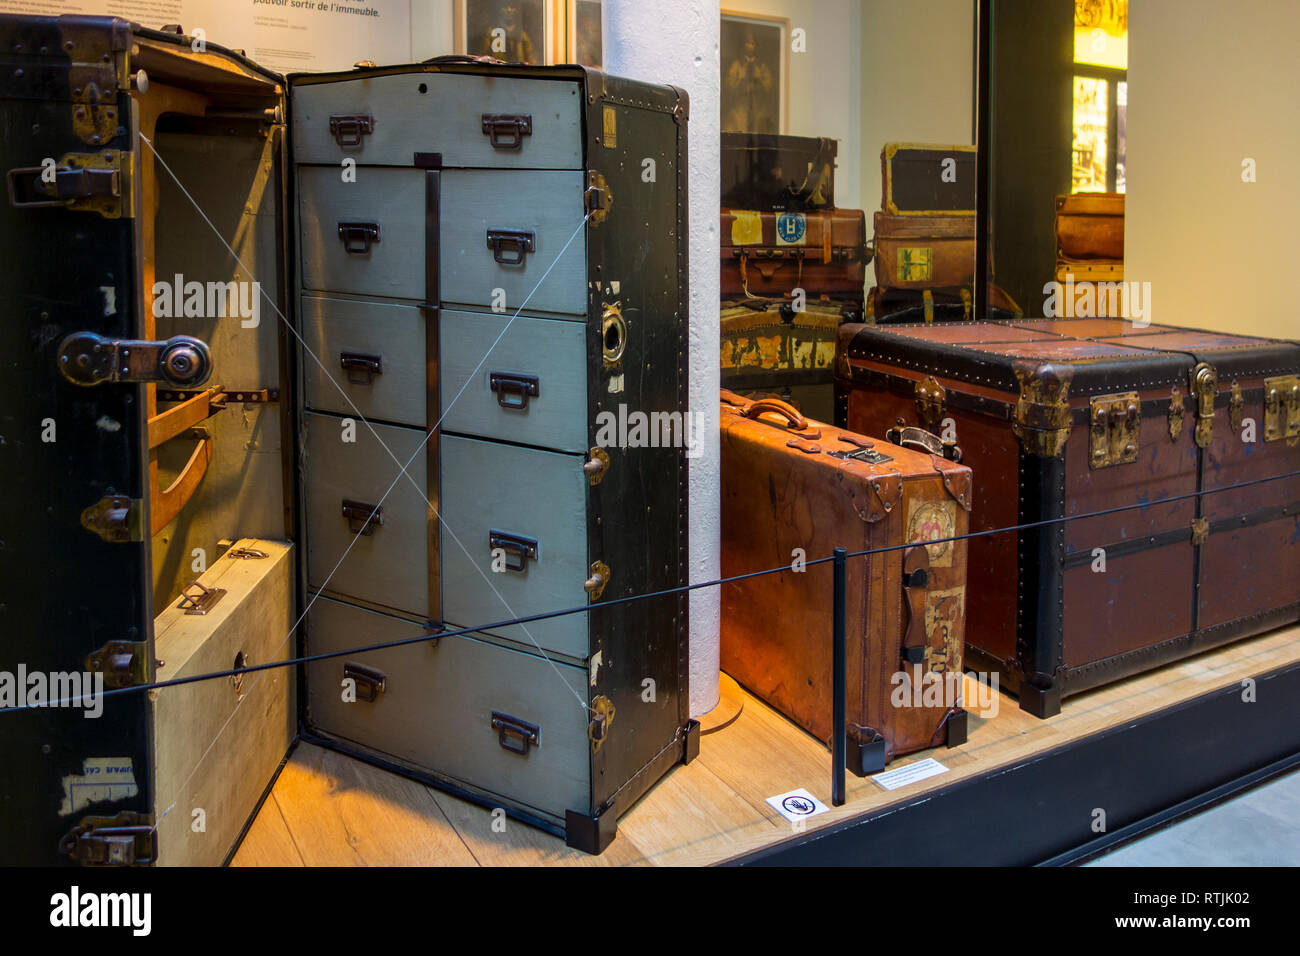 Vintage suitcases and emigrants' travel trunks of the early 1900s in the Red Star Line museum in the port of Antwerp, Flanders, Belgium Stock Photo